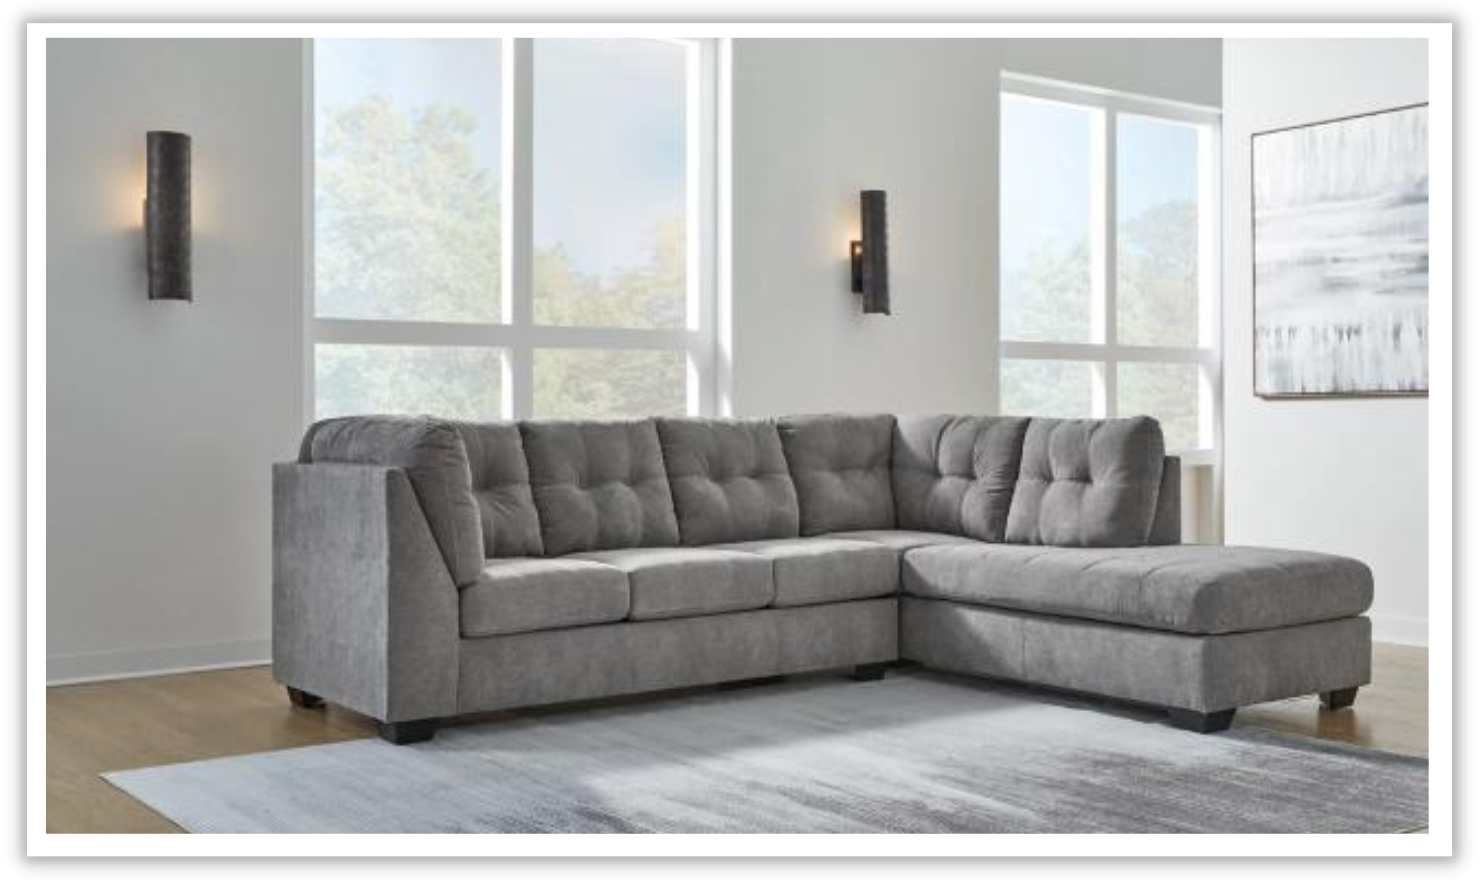 Marleton 2-Piece Tufted Fabric Sectional with Chaise